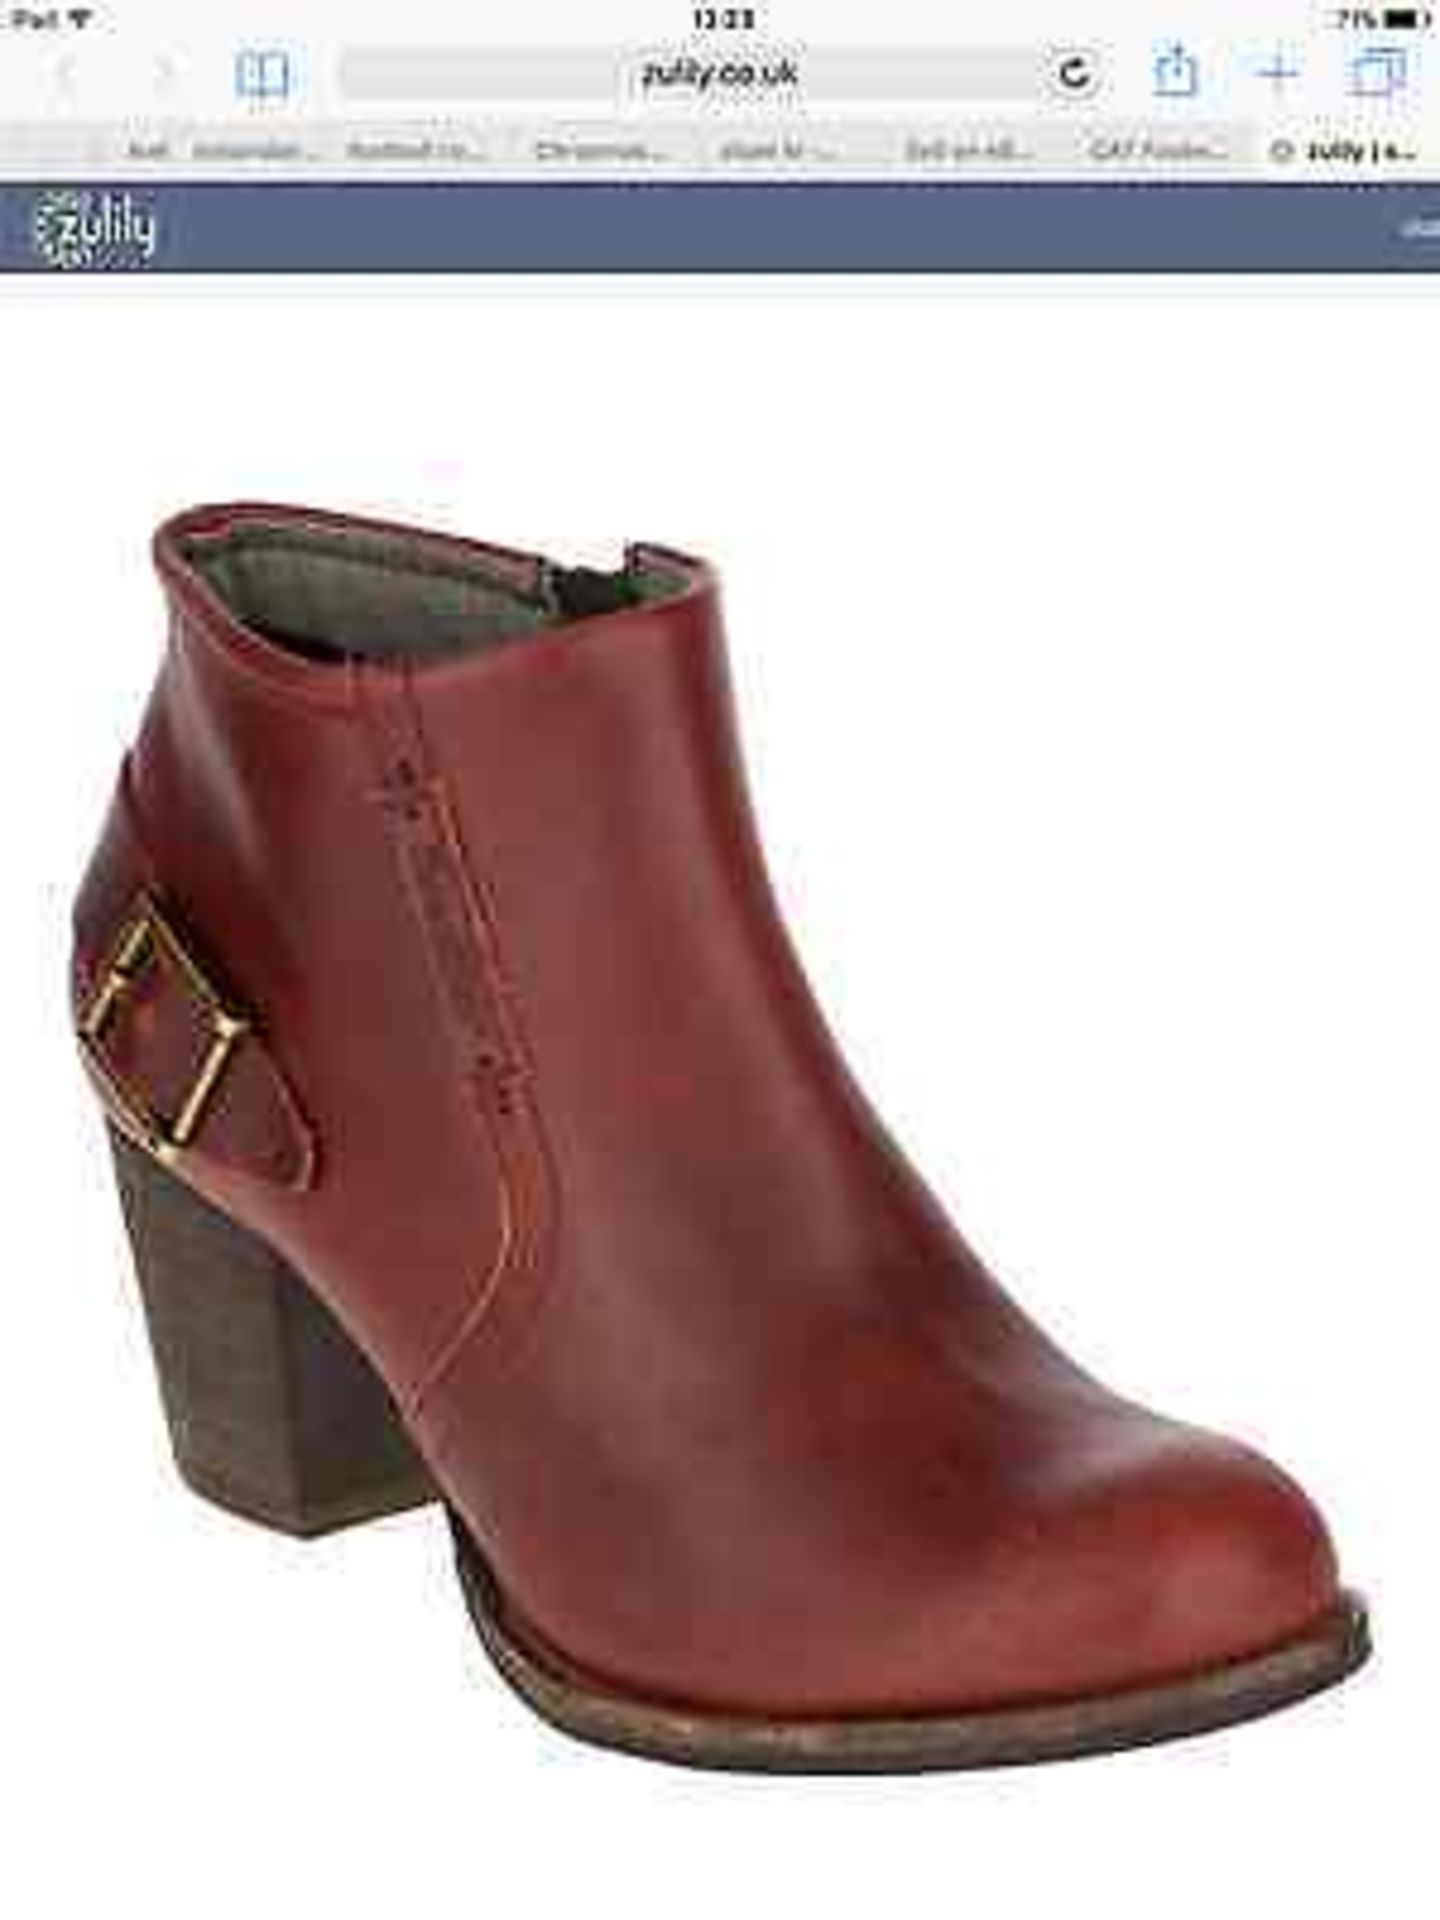 Cat Footwear Firewood Ladies Annette Leather Bootie, size 3.5, RRP £222.99 (New with box) [Ref: ]